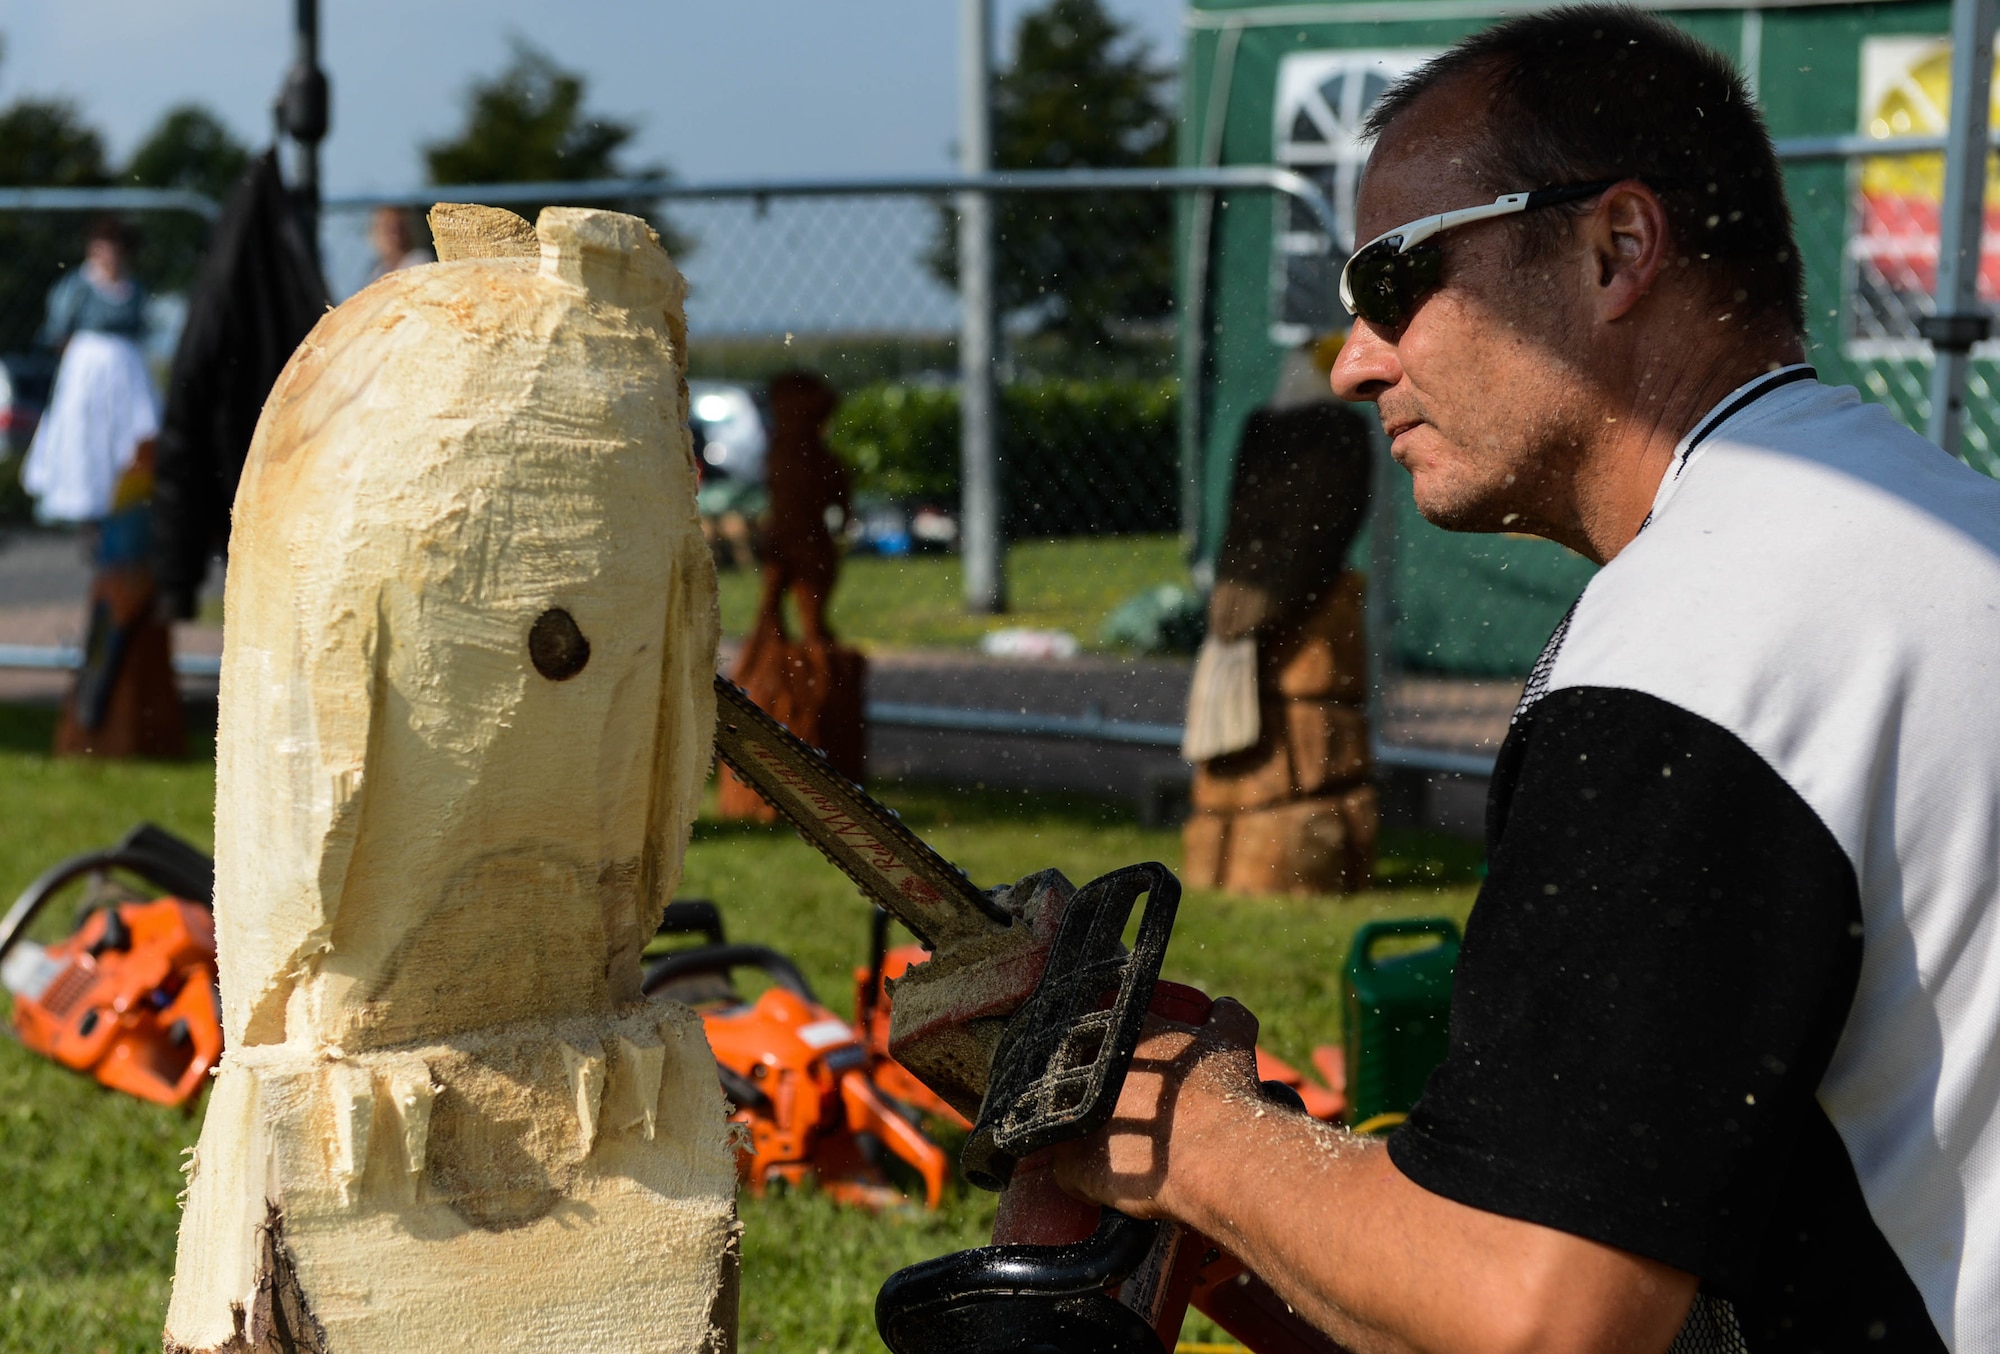 Dietmar Schier, a sculptor from Landscheid, Germany, uses a chainsaw to sculpt an owl during a Diversity Day celebration at Spangdahlem Air Base, Germany, Aug. 21, 2014. Event coordinators host Diversity Day each year to recognize the importance of mutual respect for others. (U.S. Air Force photo by Airman 1st Class Kyle Gese/Released)